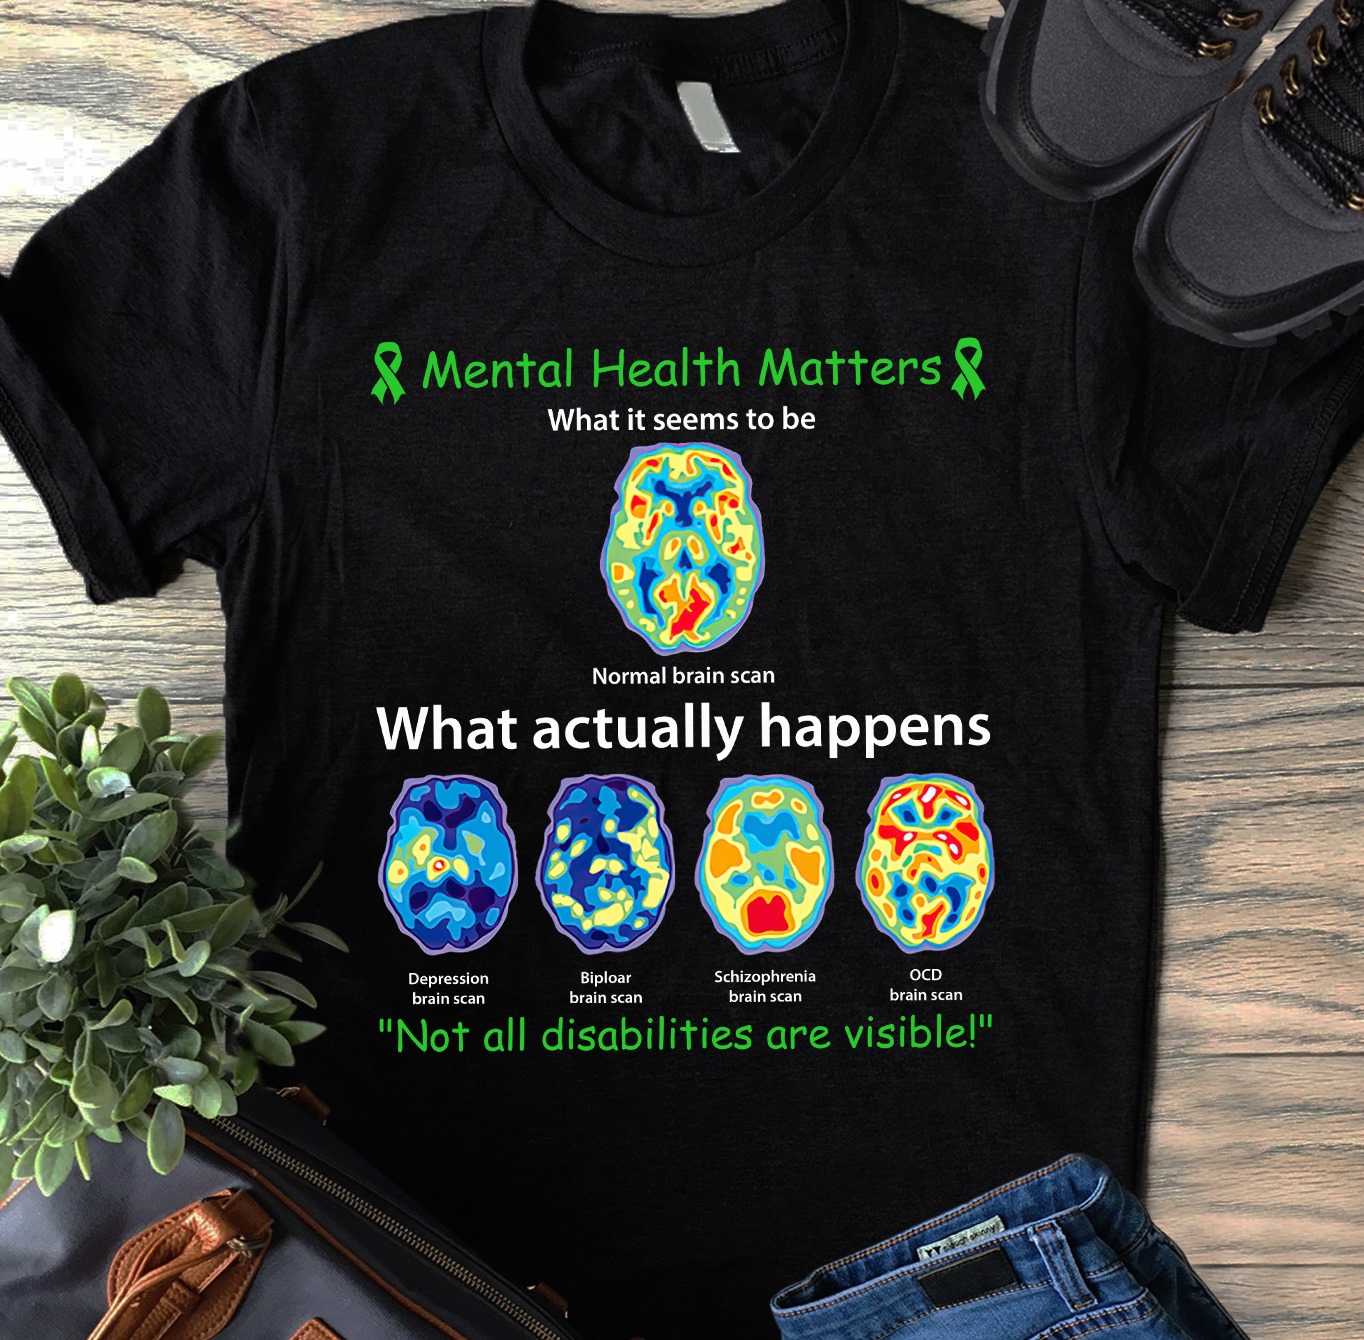 Mental health matters - Not all disabilities are visible